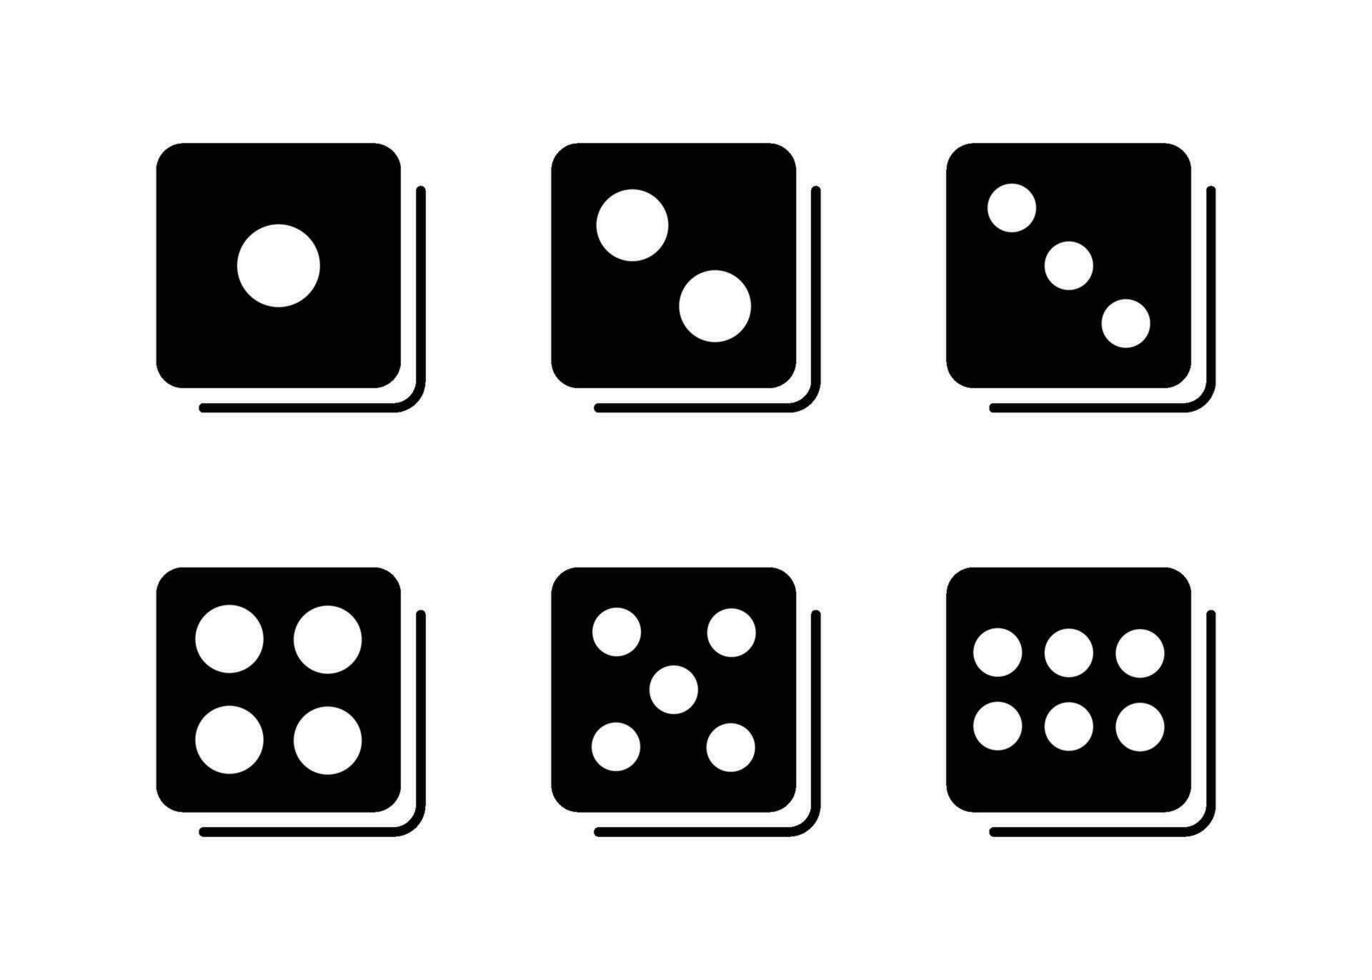 Dice icon silhouette design template vector isolated